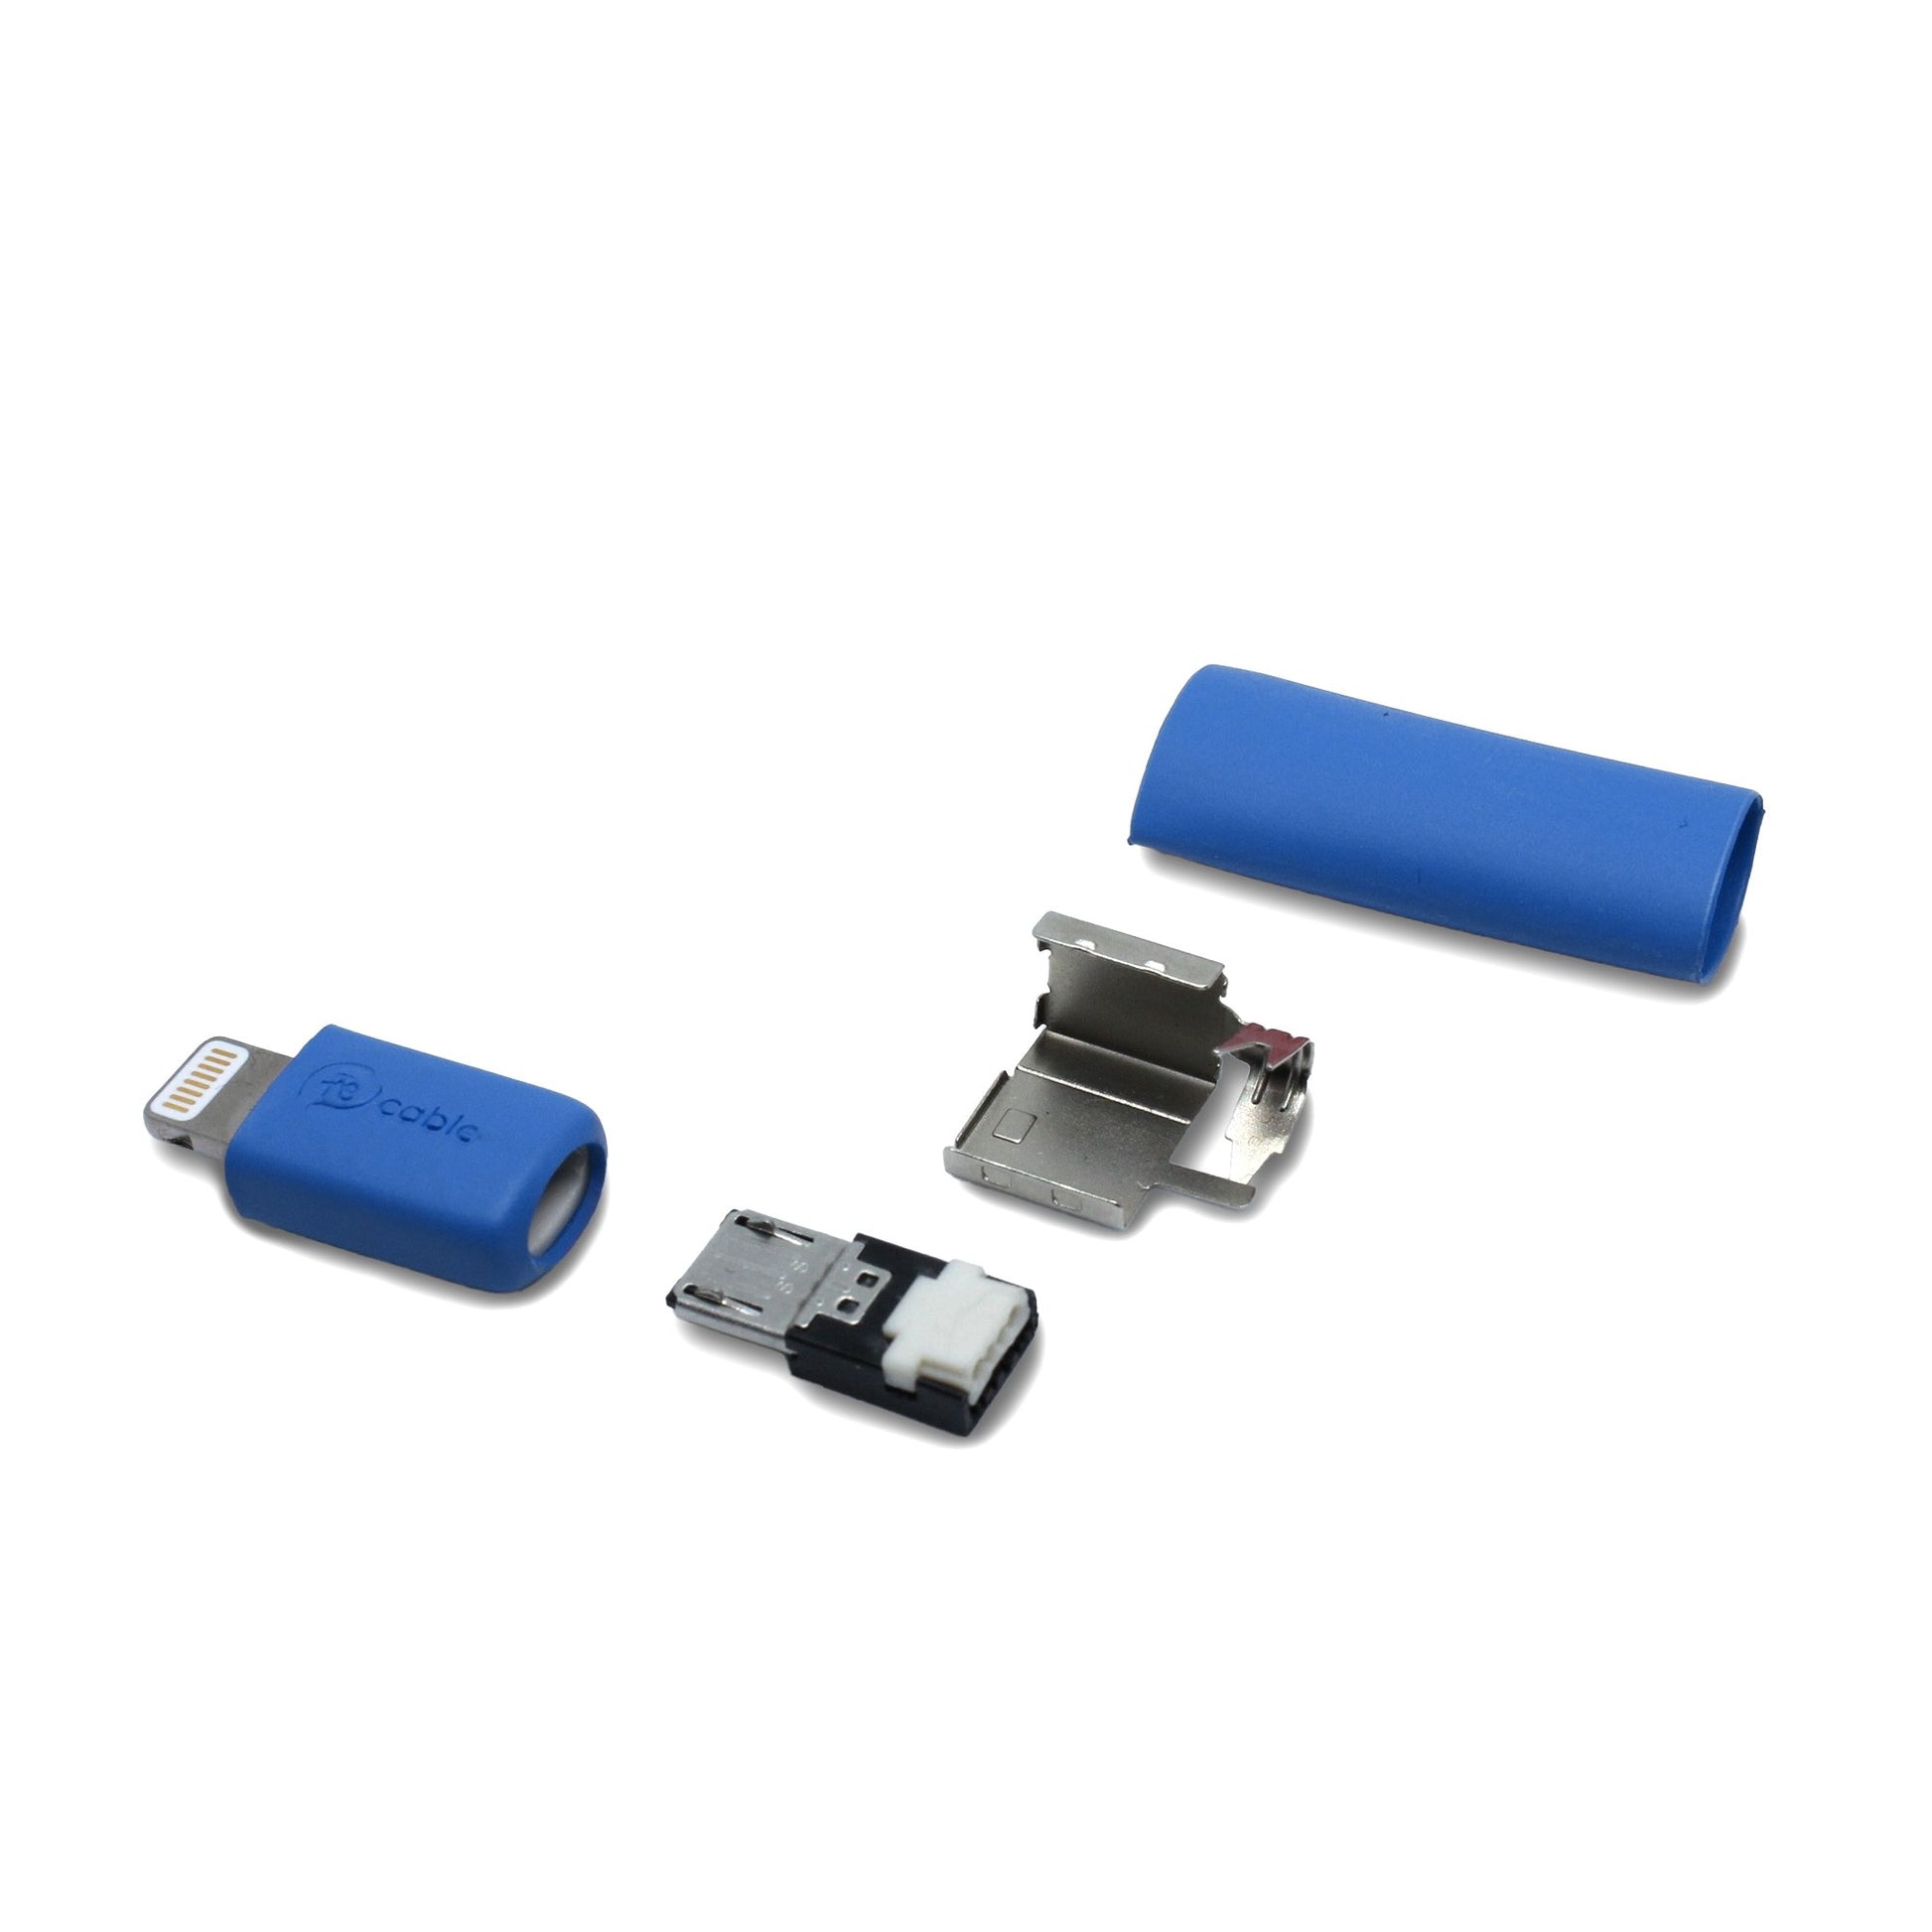 Lightning (iPhone) connector USB 2.0 | spare parts set - recable.eu - fair and sustainable USB cable made in Germany